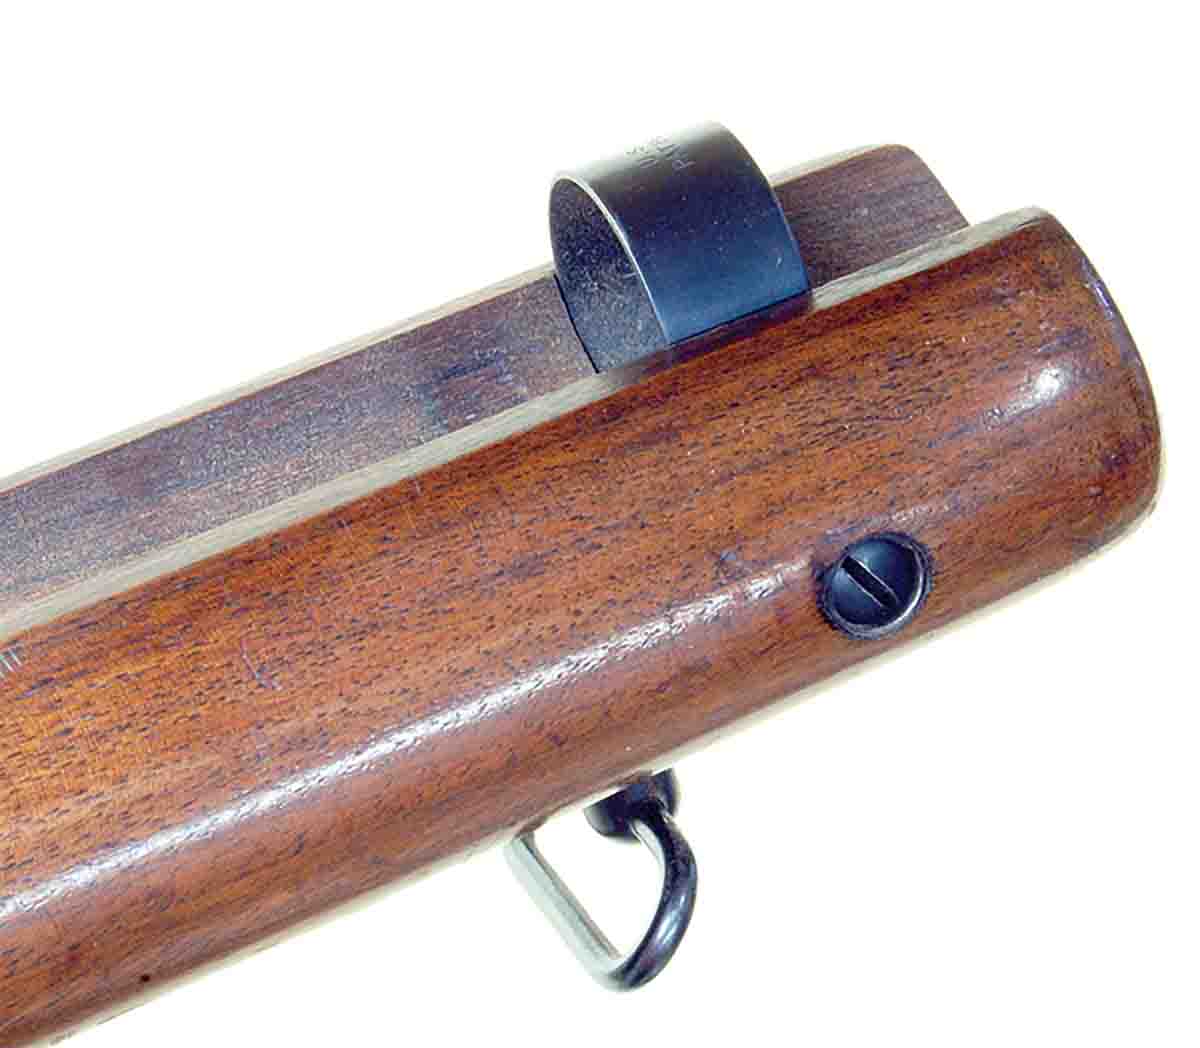 A barrel band bedding clamp was used on this Winchester M52C target rifle. This does not work well as the barrel is not pulled straight down.